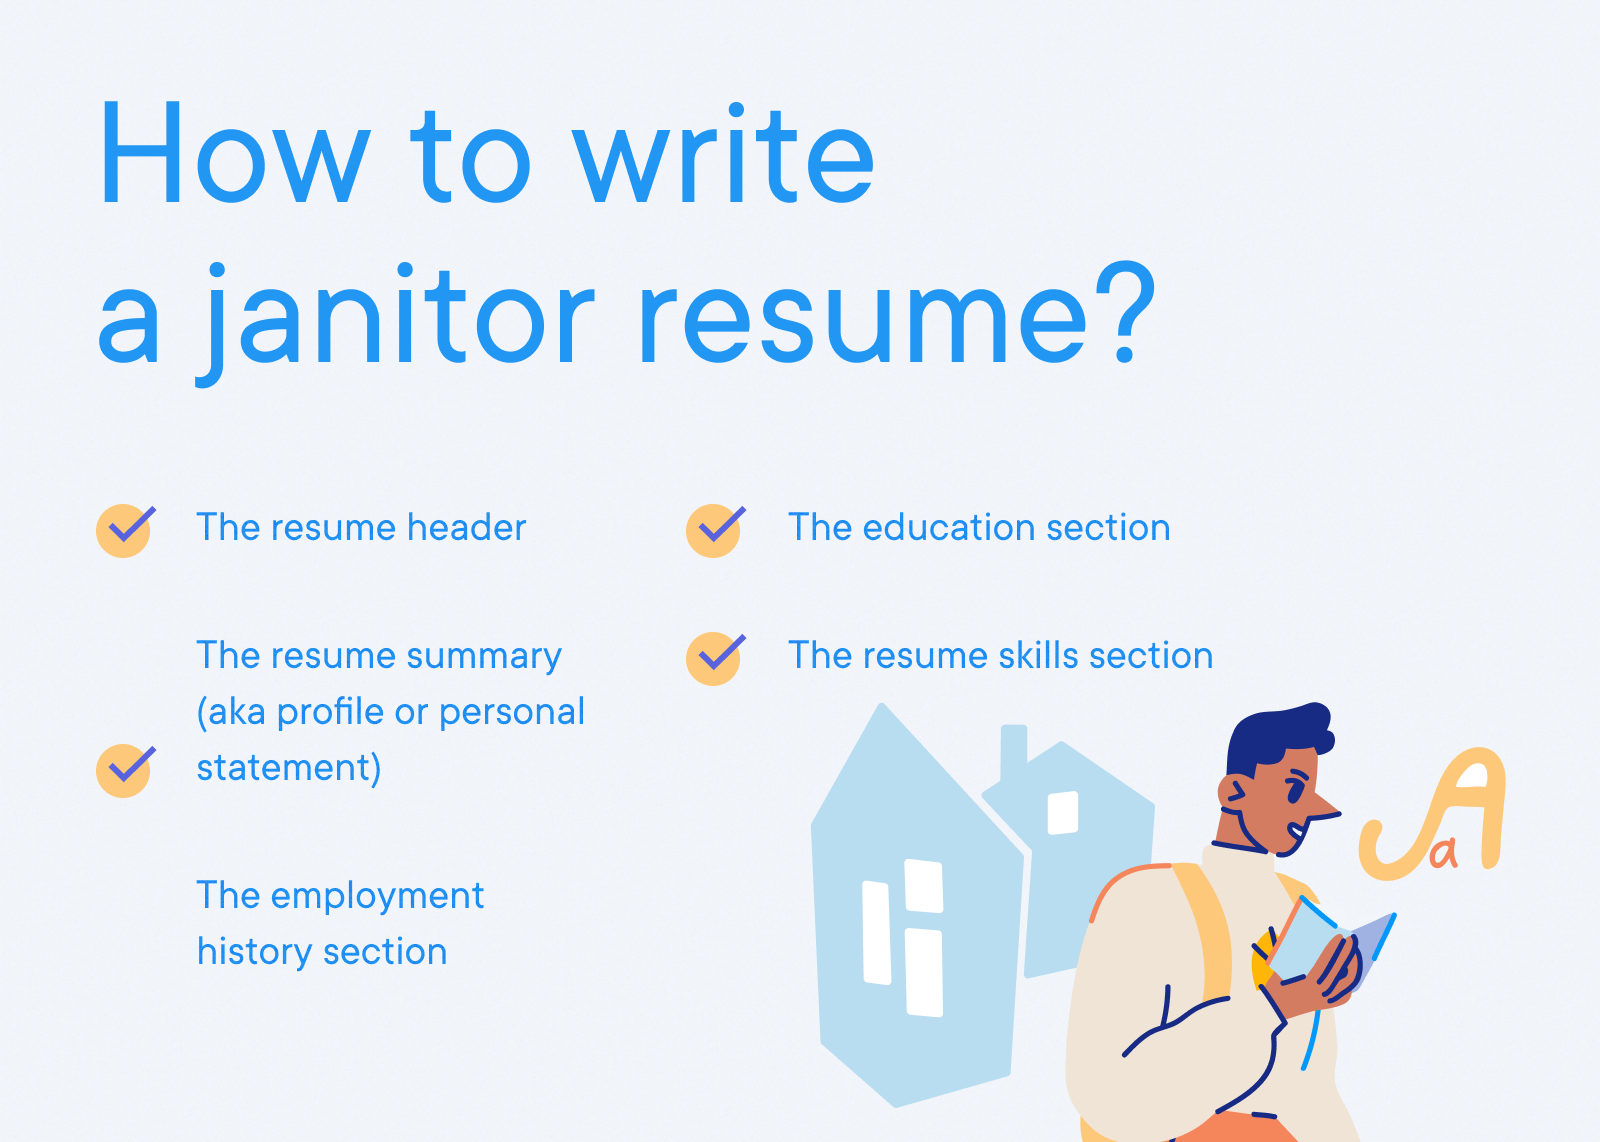 Janitor - How to write a janitor resume?